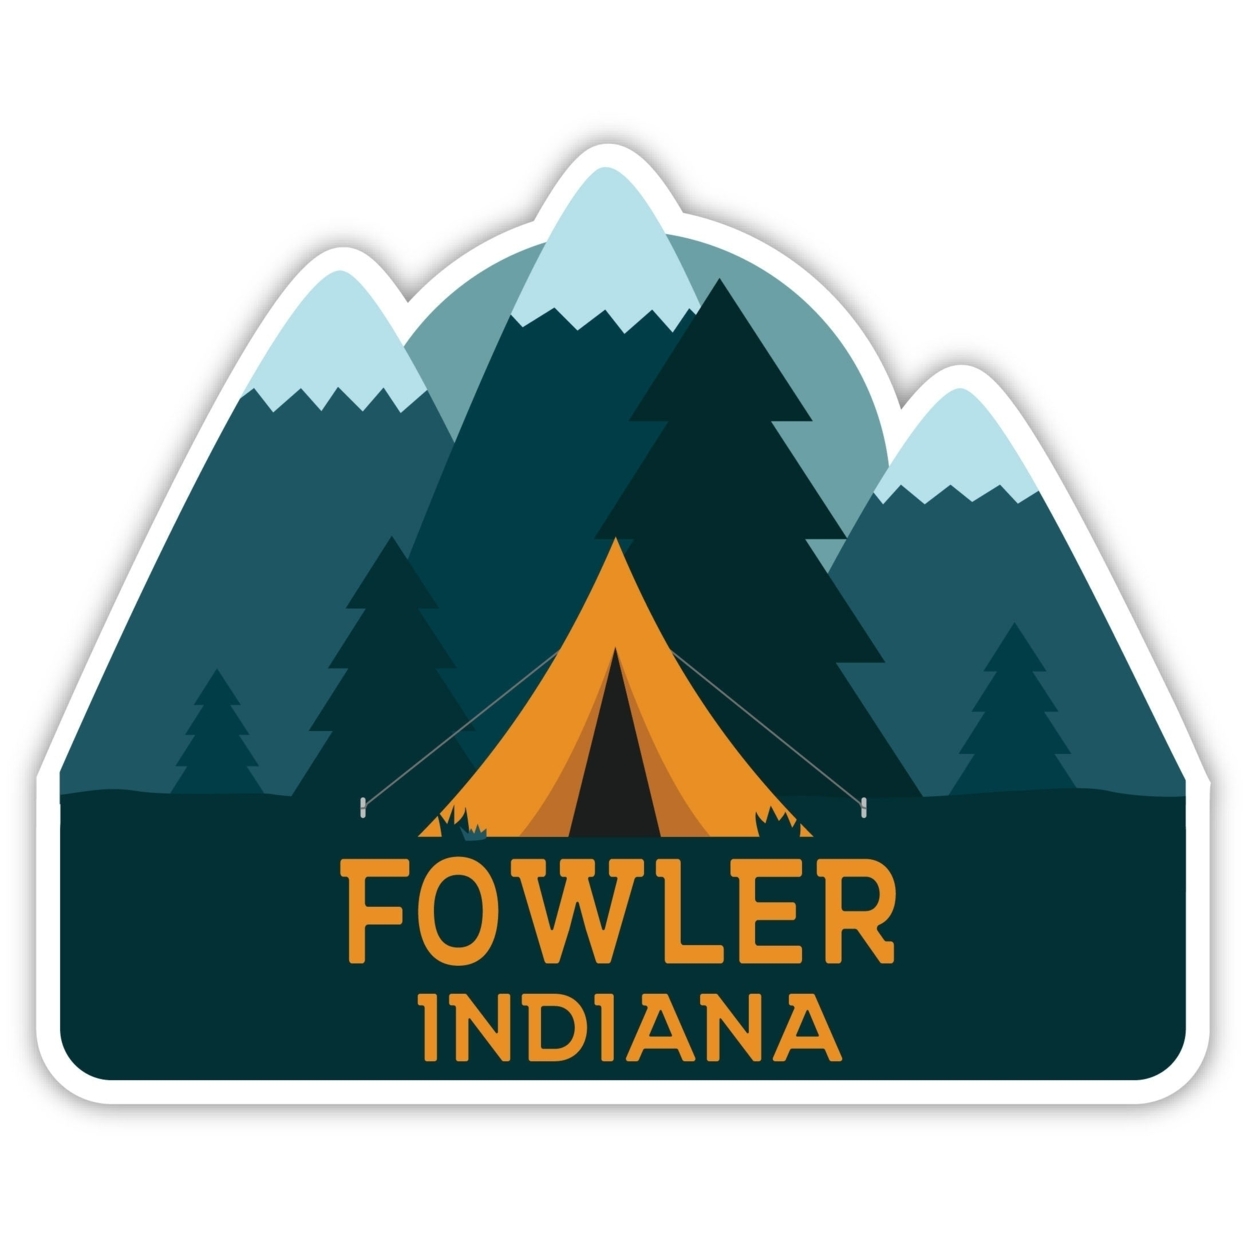 Fowler Indiana Souvenir Decorative Stickers (Choose Theme And Size) - Single Unit, 8-Inch, Tent